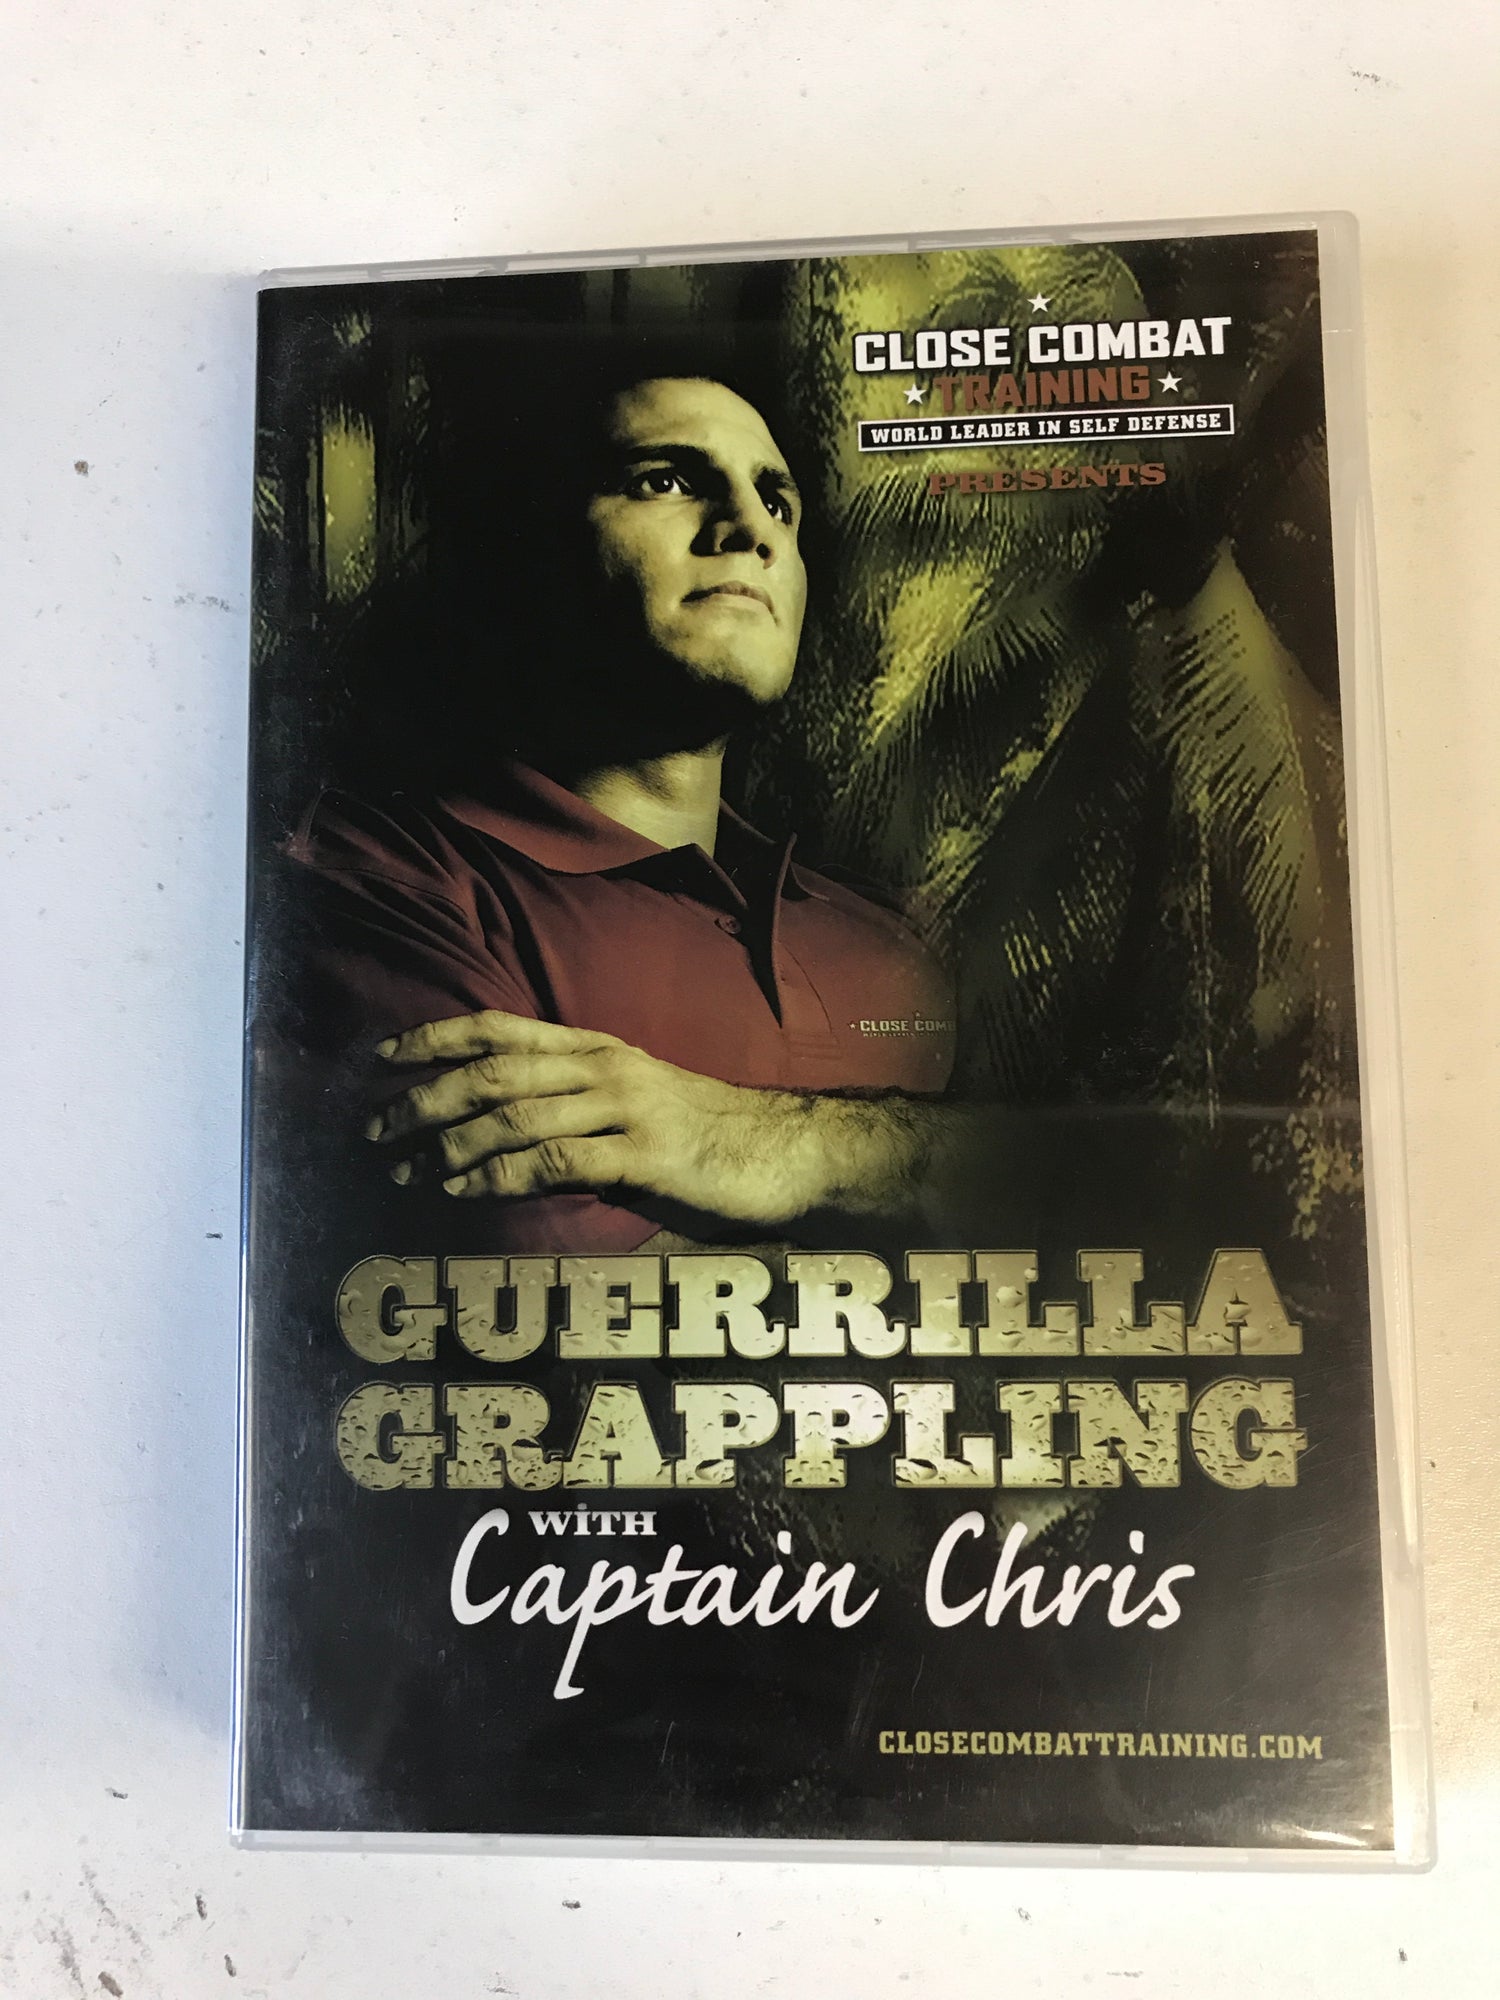 Guerrilla Grappling with Captain Chris - Close Combat Training 4 DVD Set with Captain Chris (Preowned) - Budovideos